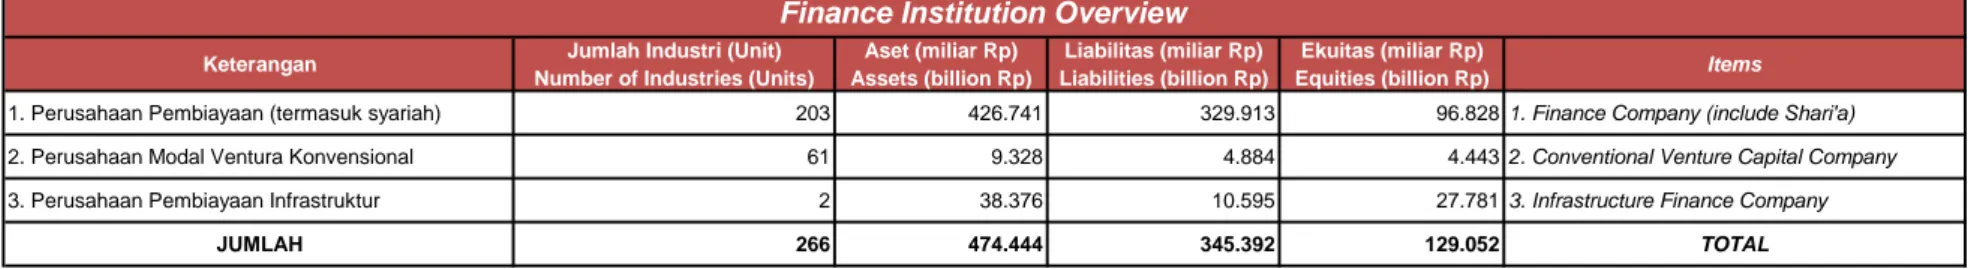 Tabel 1 Overview Lembaga Pembiayaan  Finance Institution Overview